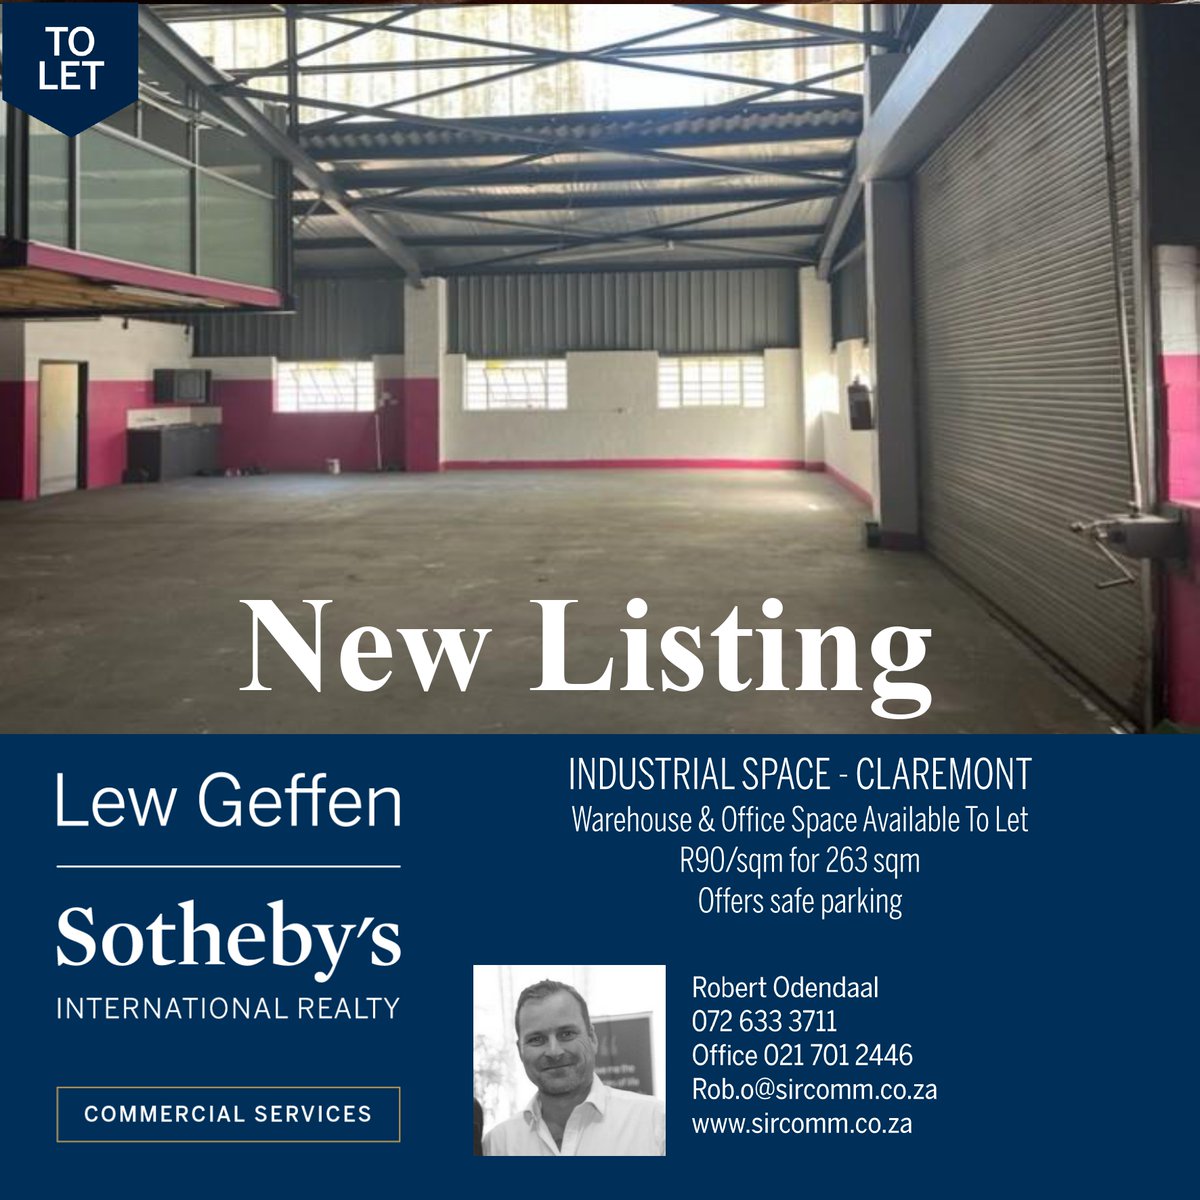 New Listing!!

Industrial Space To Let in Claremont

Contact Robert Odendaal to view today!

sircomm.co.za/results/indust…

#newlisting #industrial #spacetolet #new #justdropped #claremont #sircomm #sothebyscommercial #sothebysrealty #sothebys